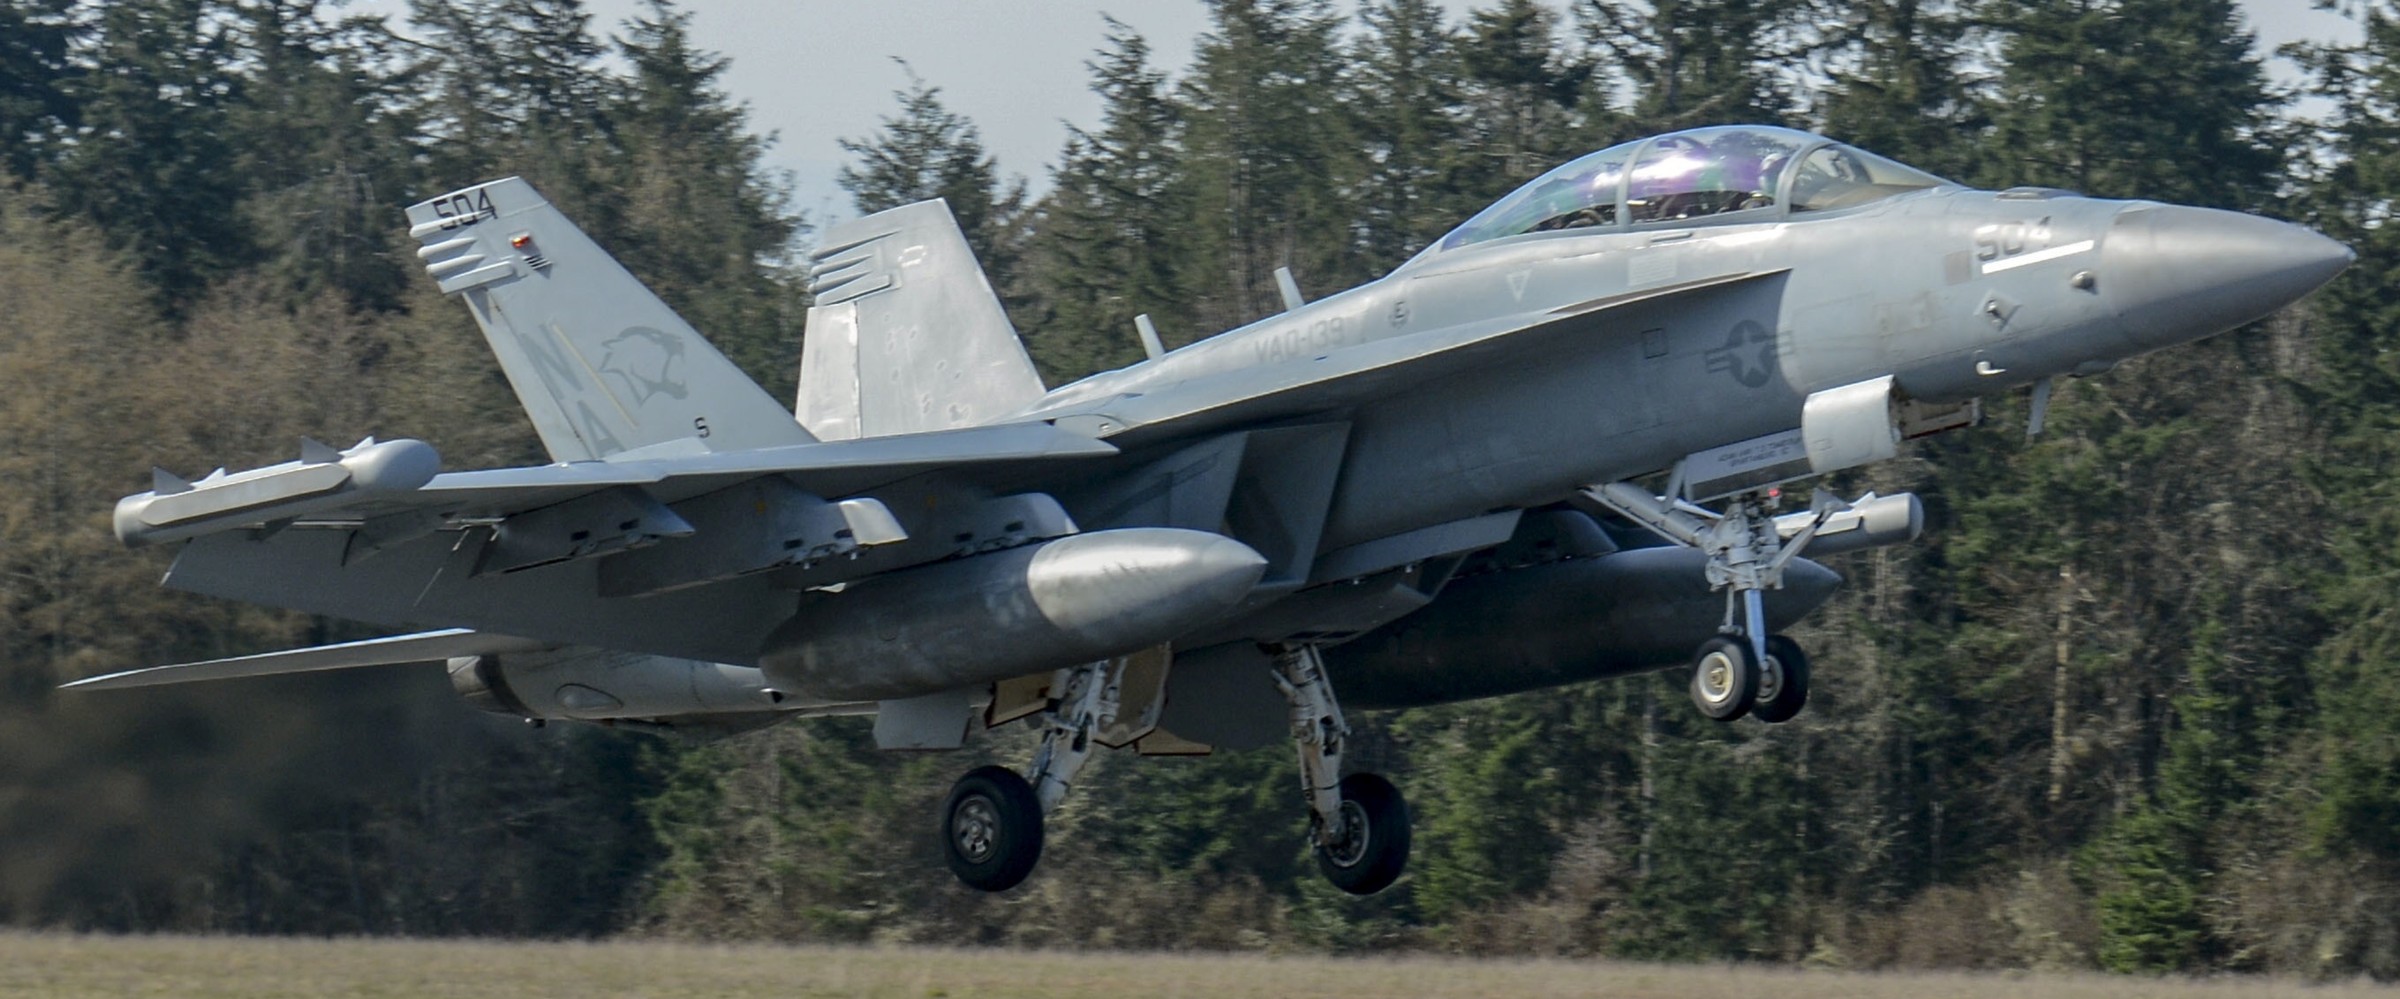 vaq-139 cougars electronic attack squadron us navy ea-18g growler cvw-17 nas whidbey island 115